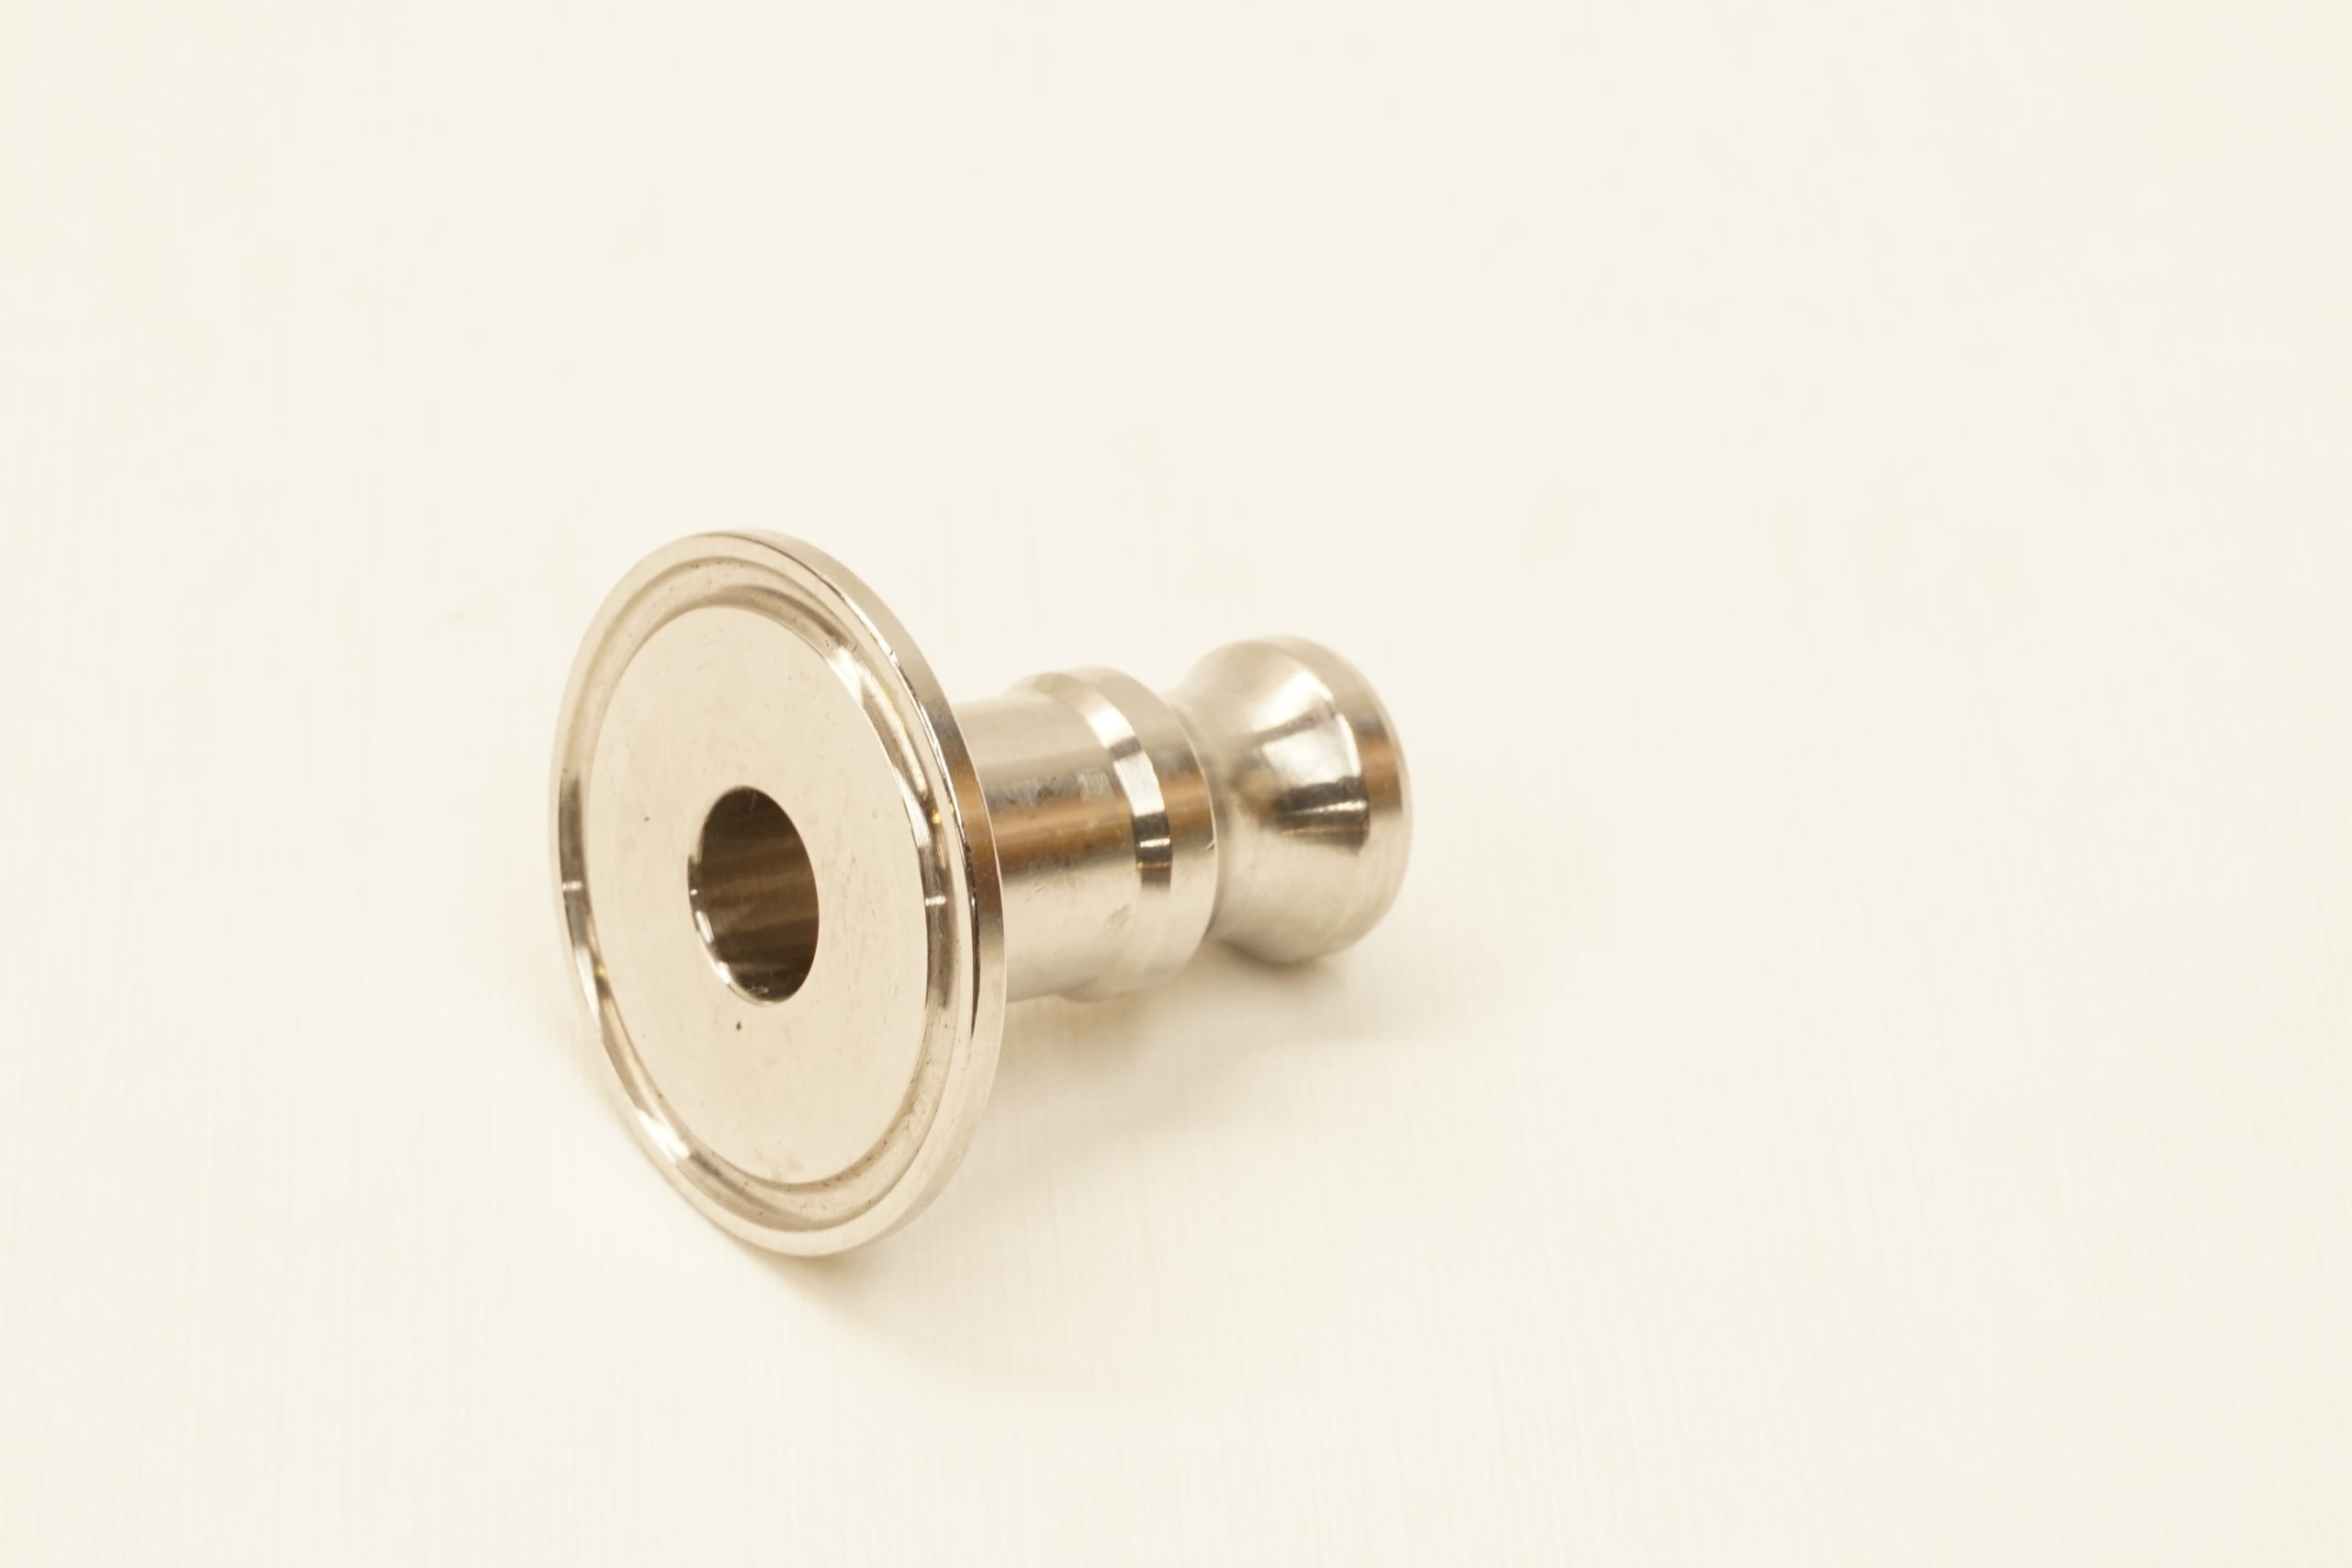 Tri Clamp 3 inch x Cam & Groove Male 3 in Camlock Adapter - Stainless Steel SS304 Glacier Tanks